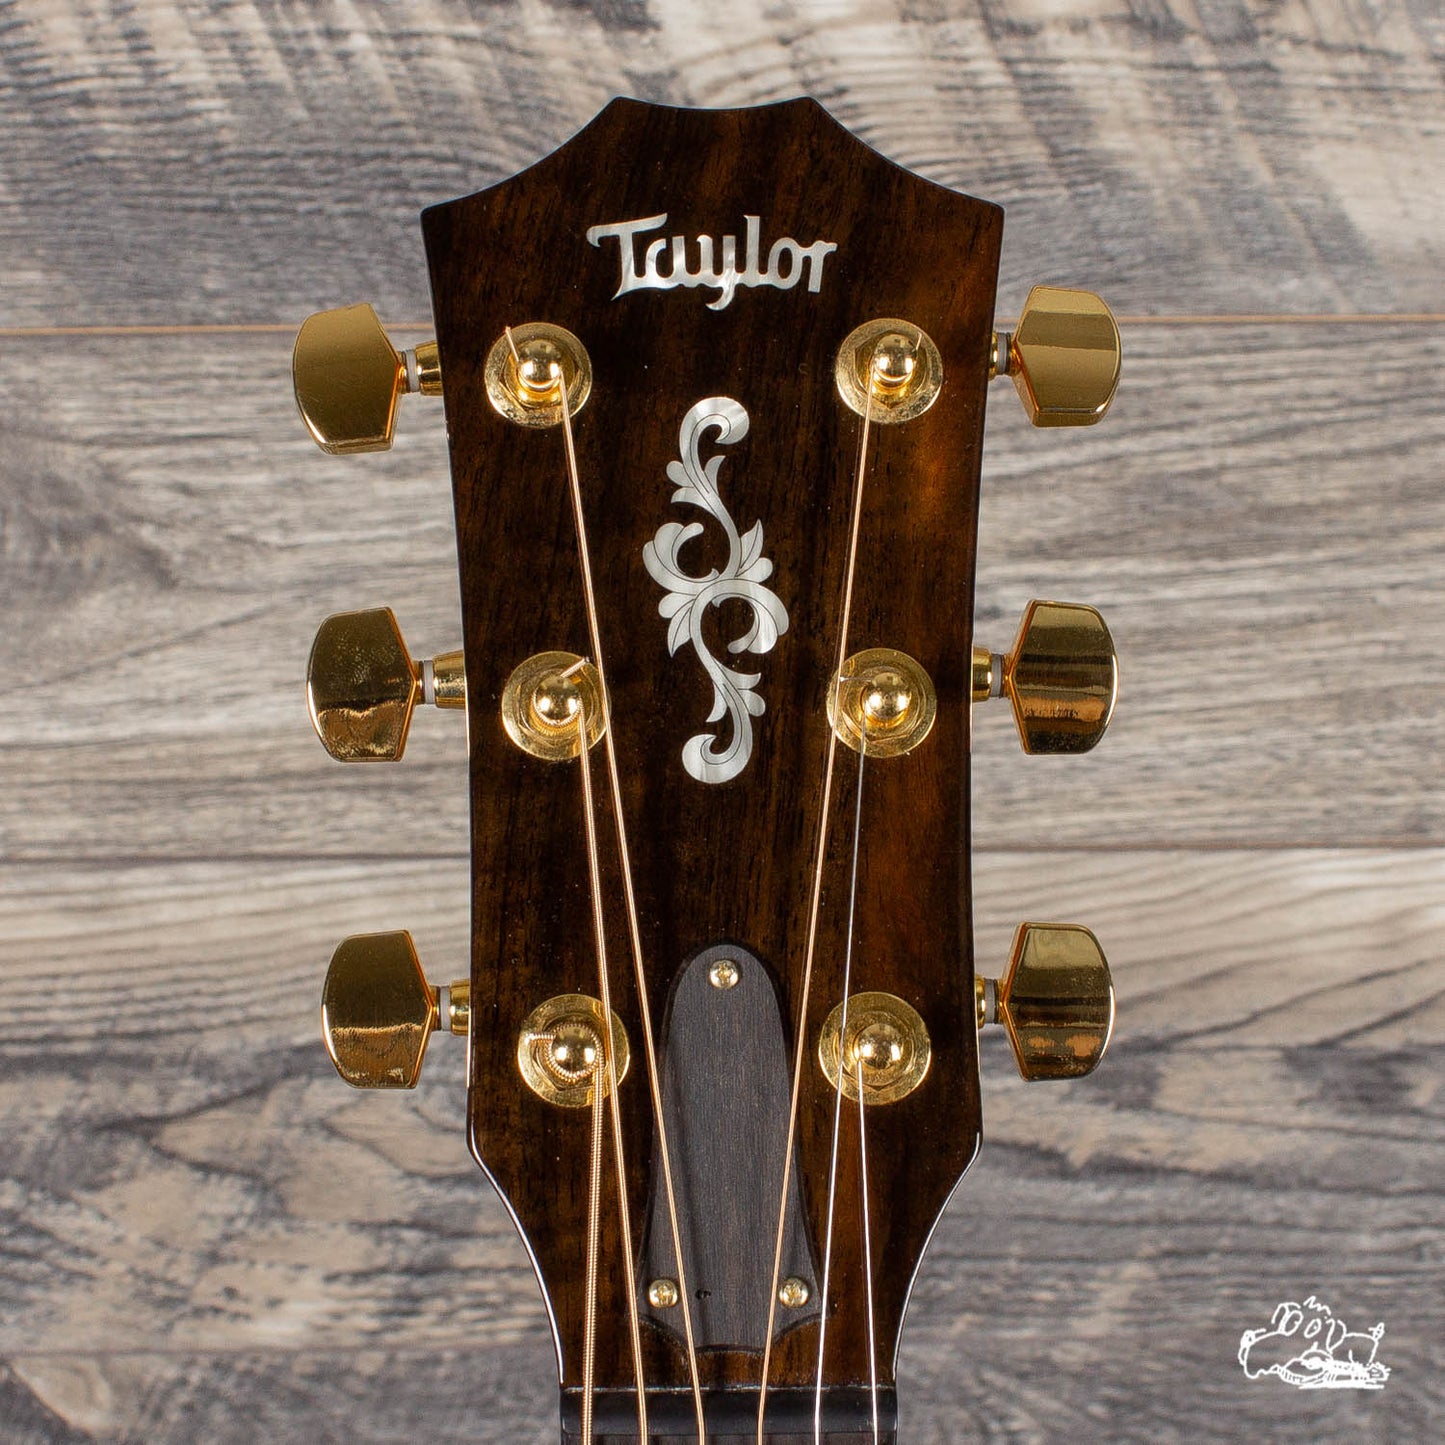 Taylor 414ce V-Class Special Edition Grand Auditorium Acoustic-Electric Guitar